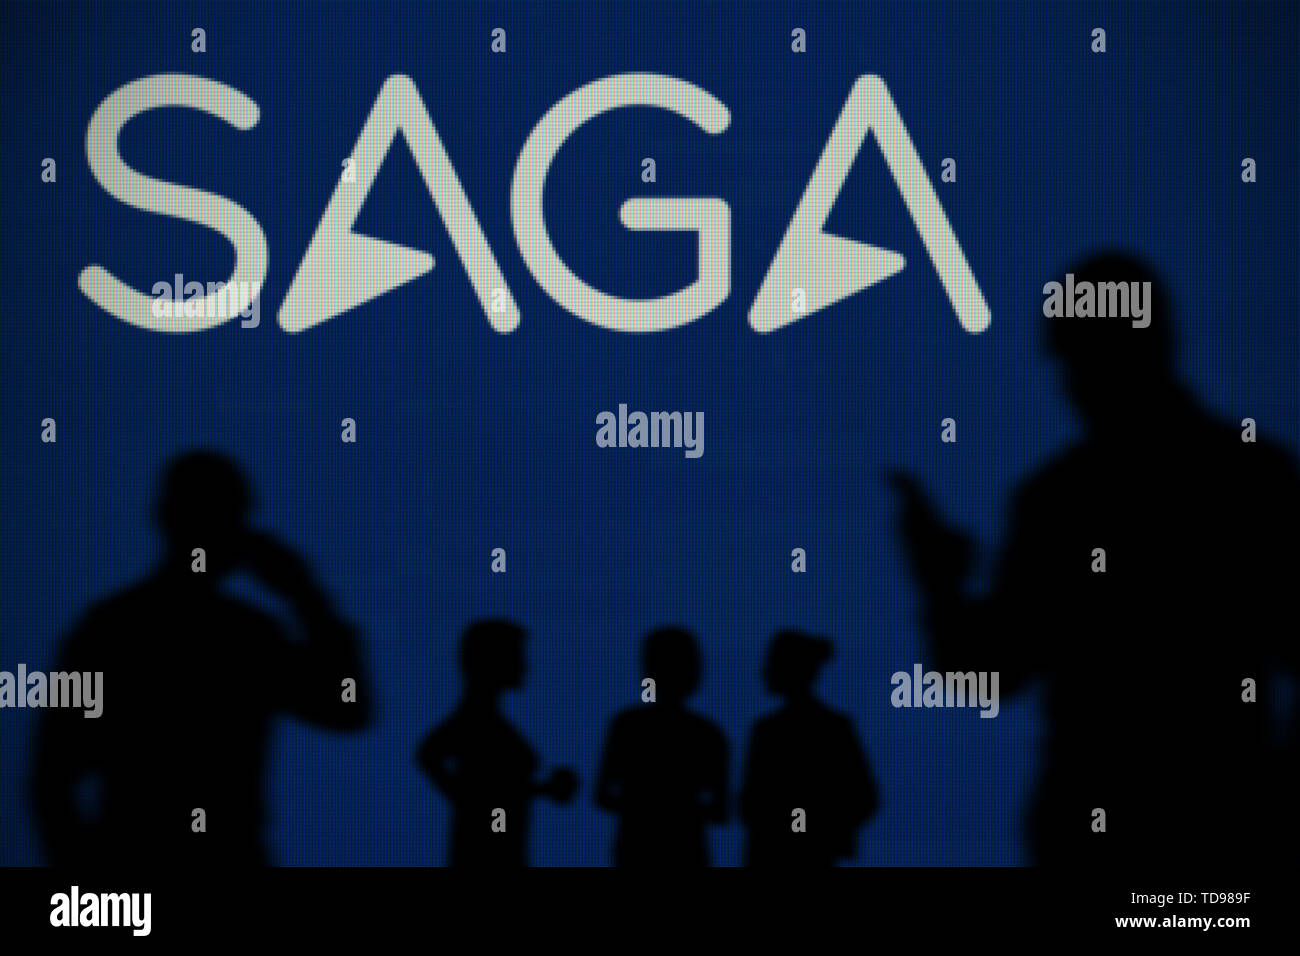 The Saga Insurance logo is seen on an LED screen in the background while a silhouetted person uses a smartphone in the foreground (Editorial use only) Stock Photo